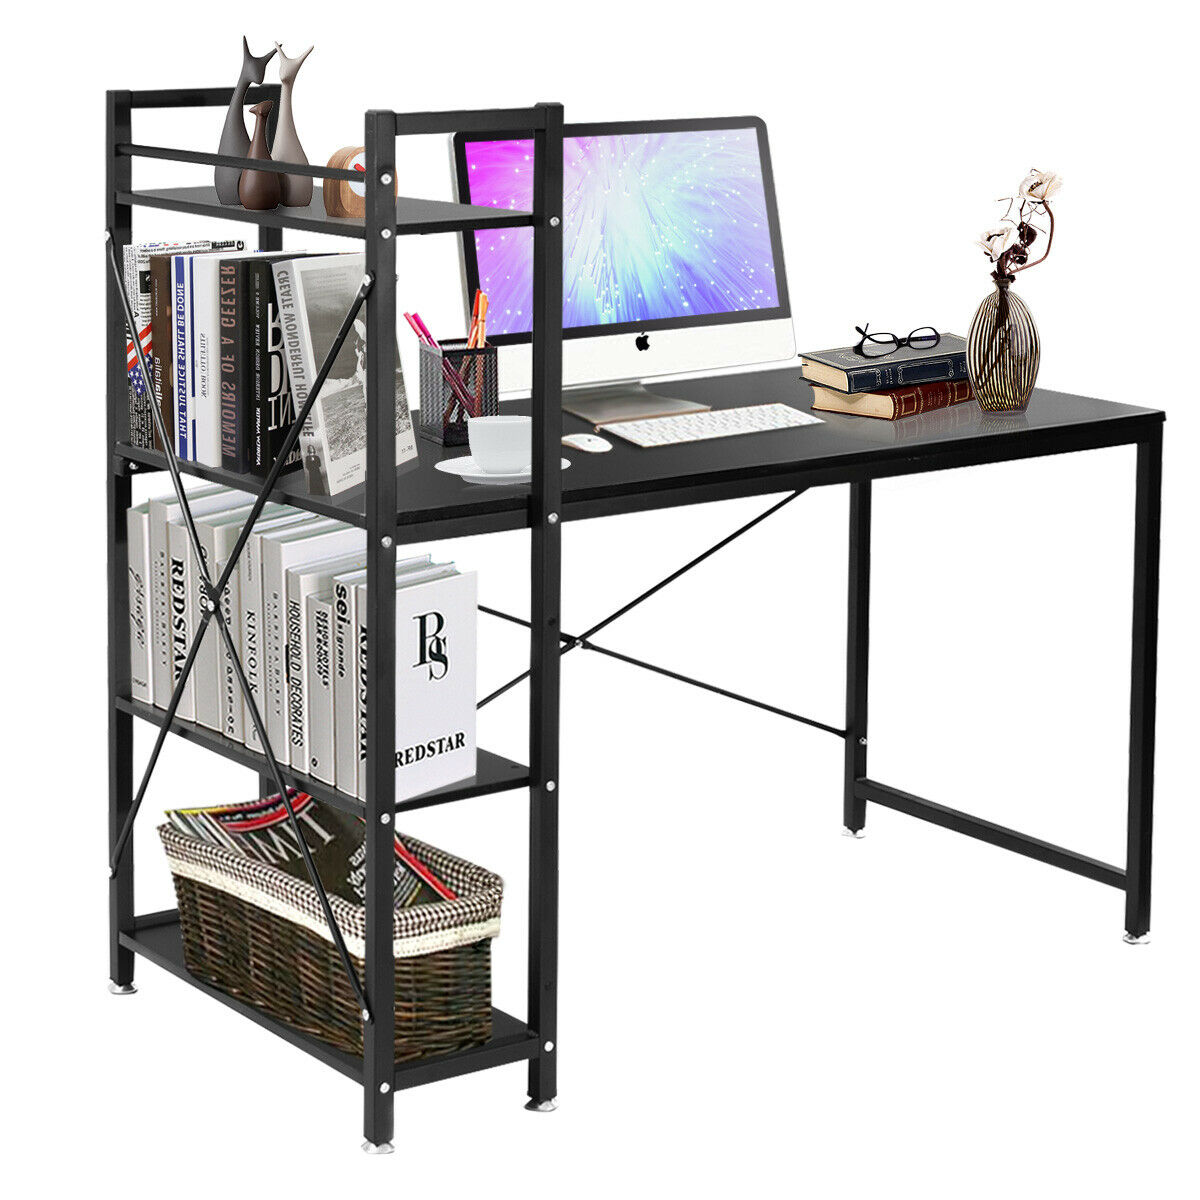 

Costway Modern Computer Laptop Desk With 4-tier Shelves Bookshelf PC Workstation Study Table Home Office Furniture